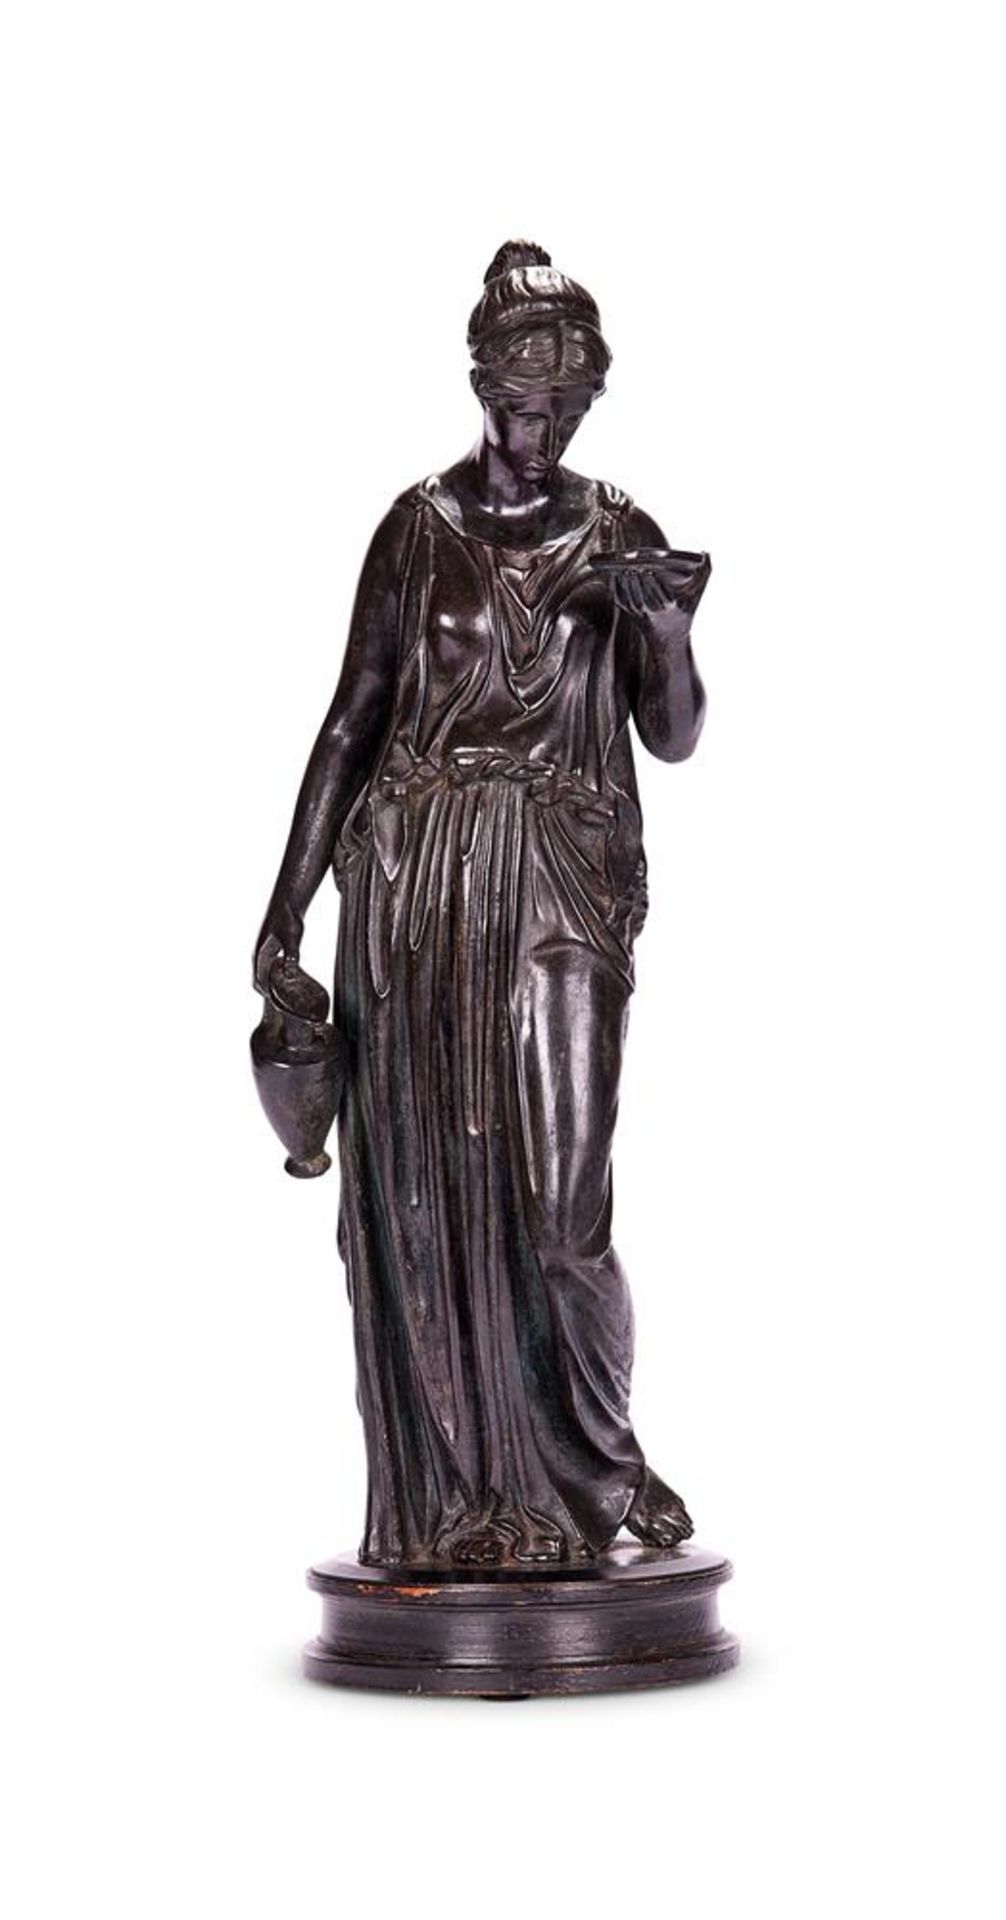 AFTER BERTEL THORVALDSEN (DANISH, 1770-1844), A CARVED WOOD FIGURE OF HEBE, MID 19TH CENTURY